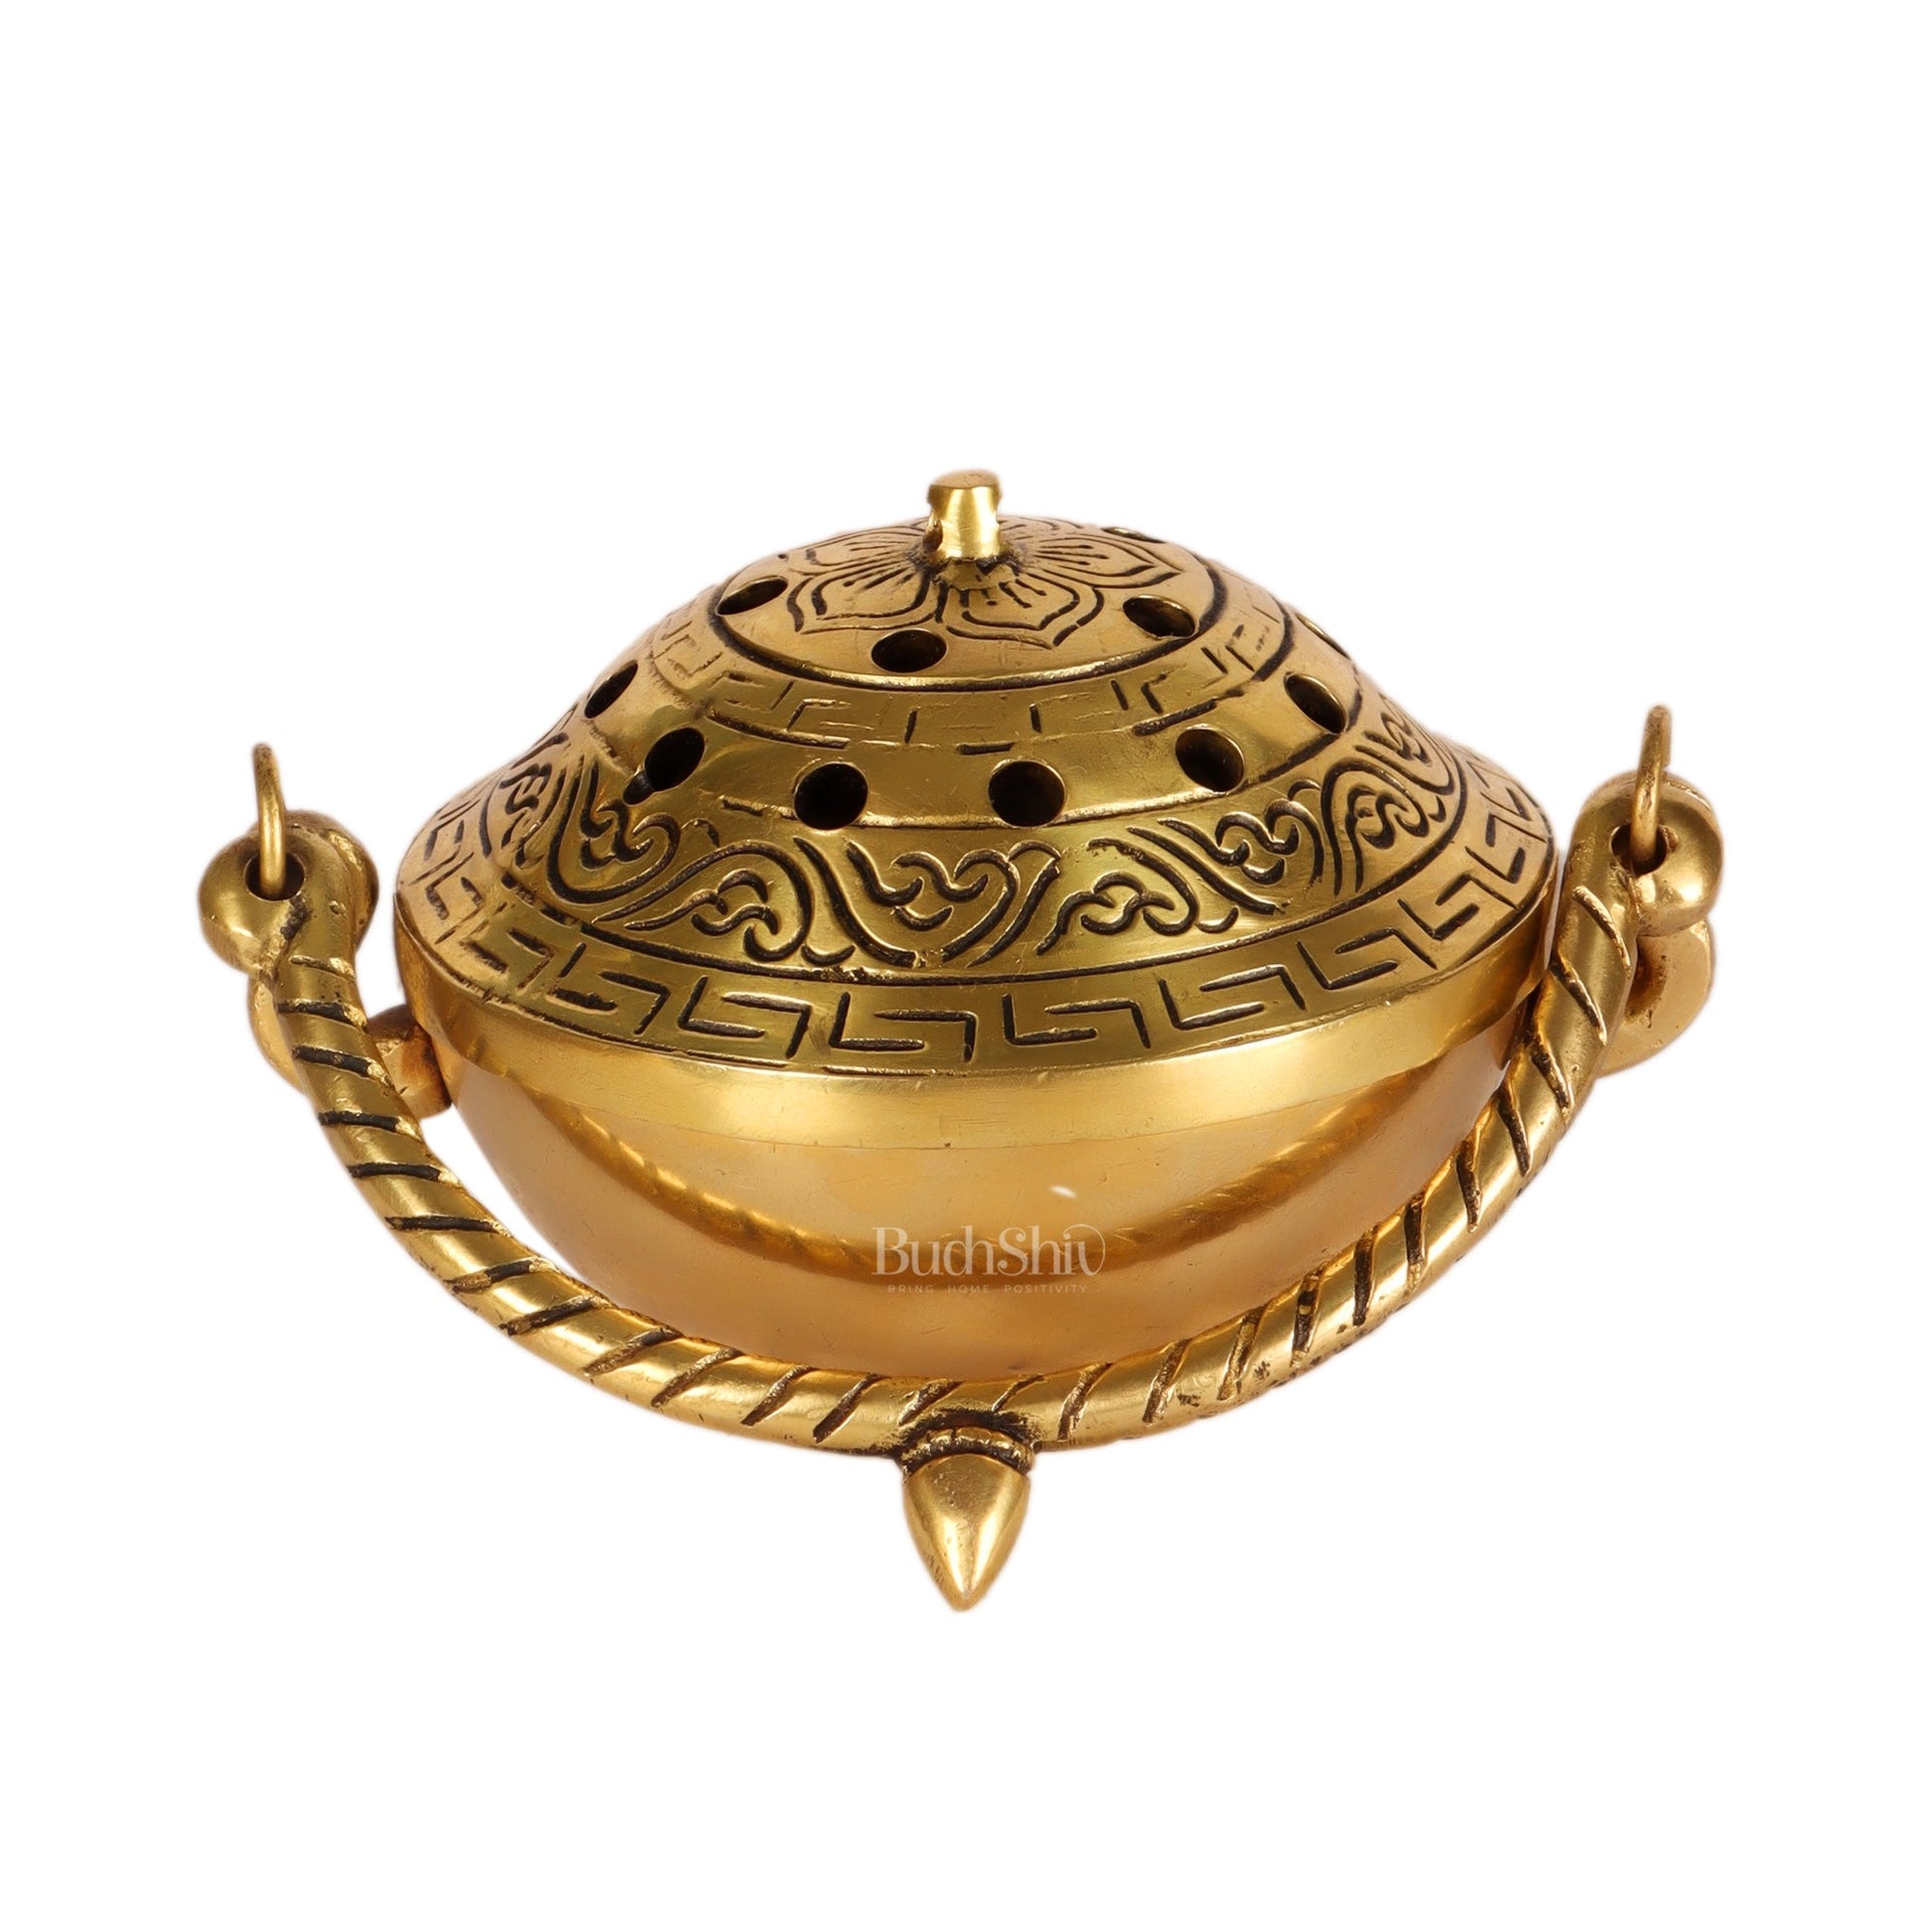 Brass Dhoop Burner with Handle and Lid - 5 inches | Traditional Incense Holder for Sacred Rituals. - Budhshiv.com